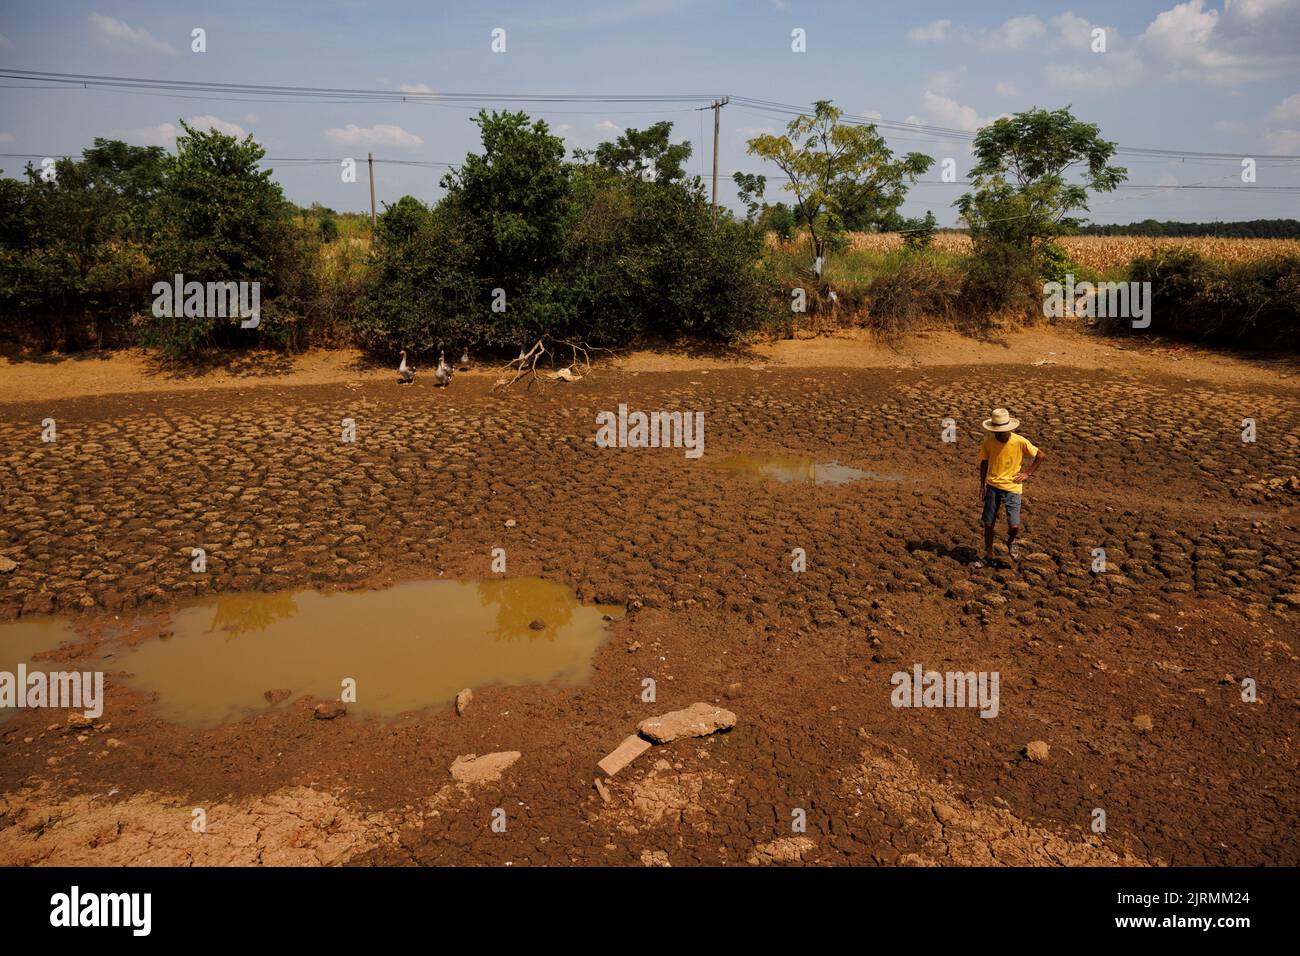 Farmer Hu, 70, stands in the village pond that dried up about 10 days ago as the region experiences a drought in Xinyao village, Nanchang city, Jiangxi province, China, August 25, 2022.  REUTERS/Thomas Peter Stock Photo